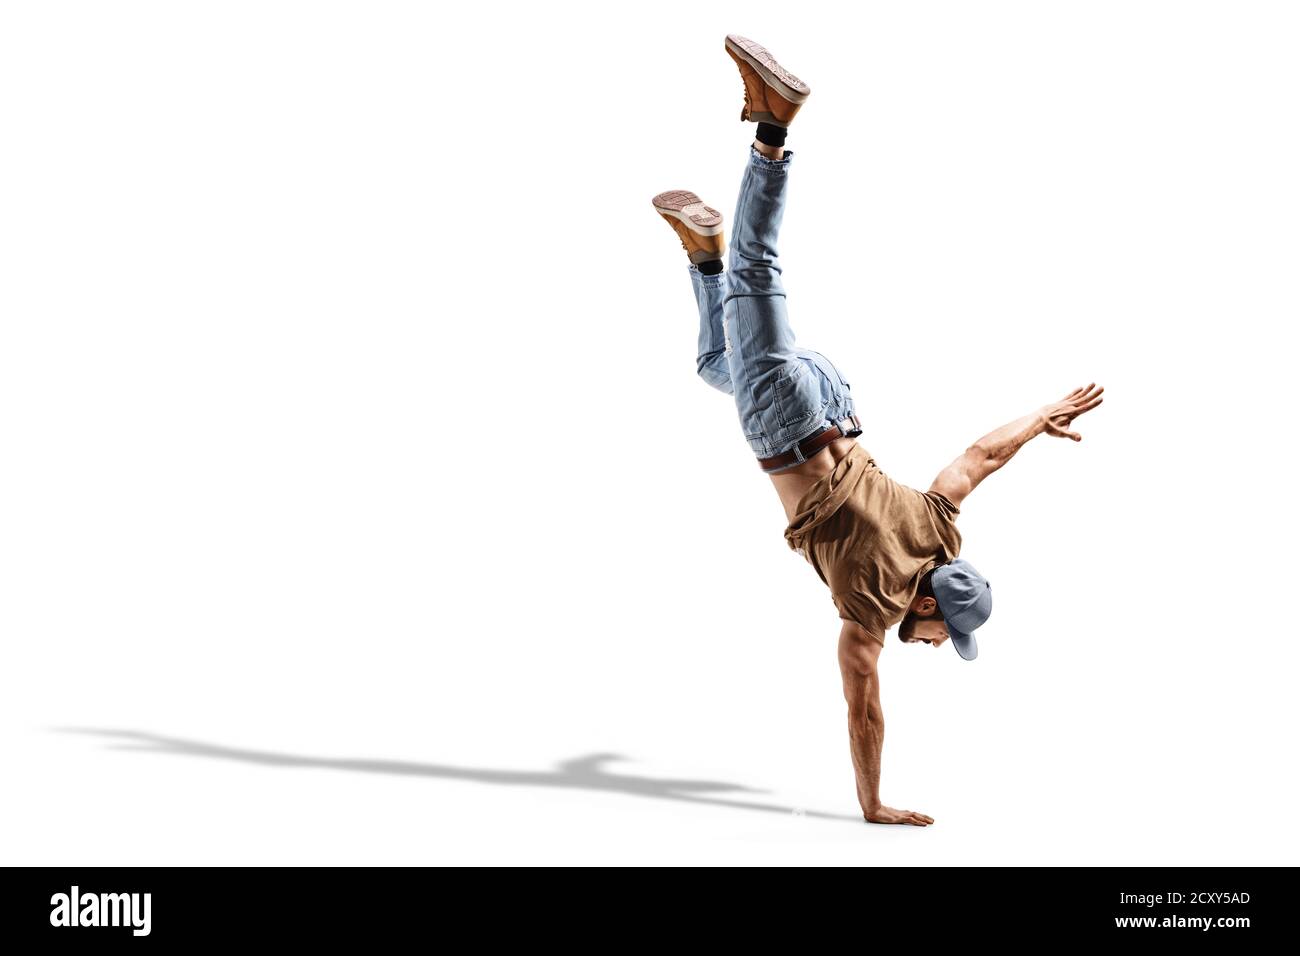 Young fit man in jeans performing a one hand stand isolated on white background Stock Photo